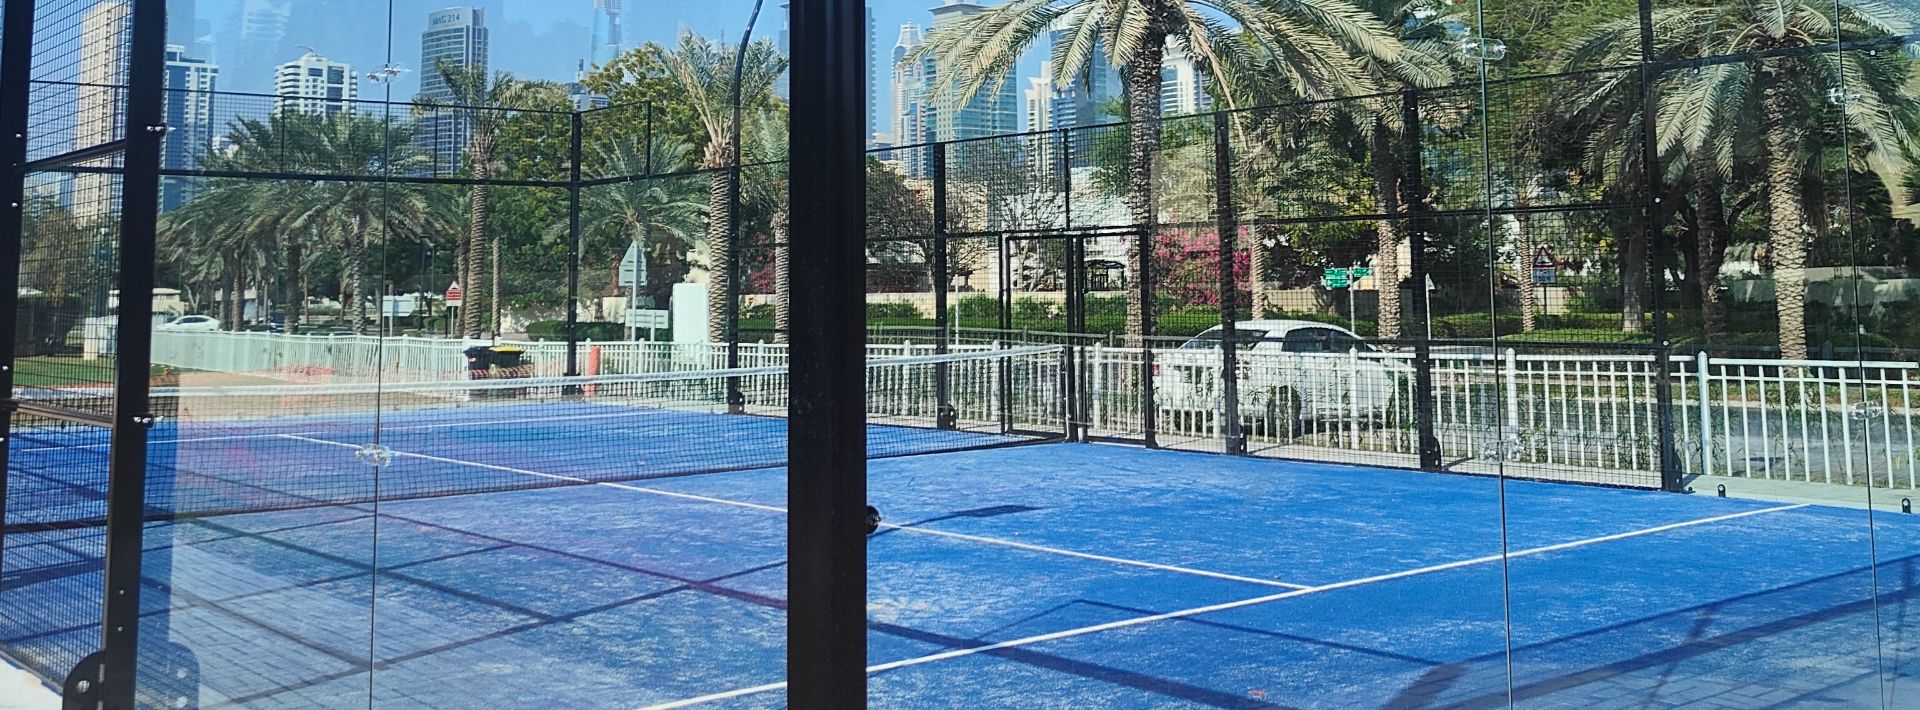 New Padel court at The Meadows